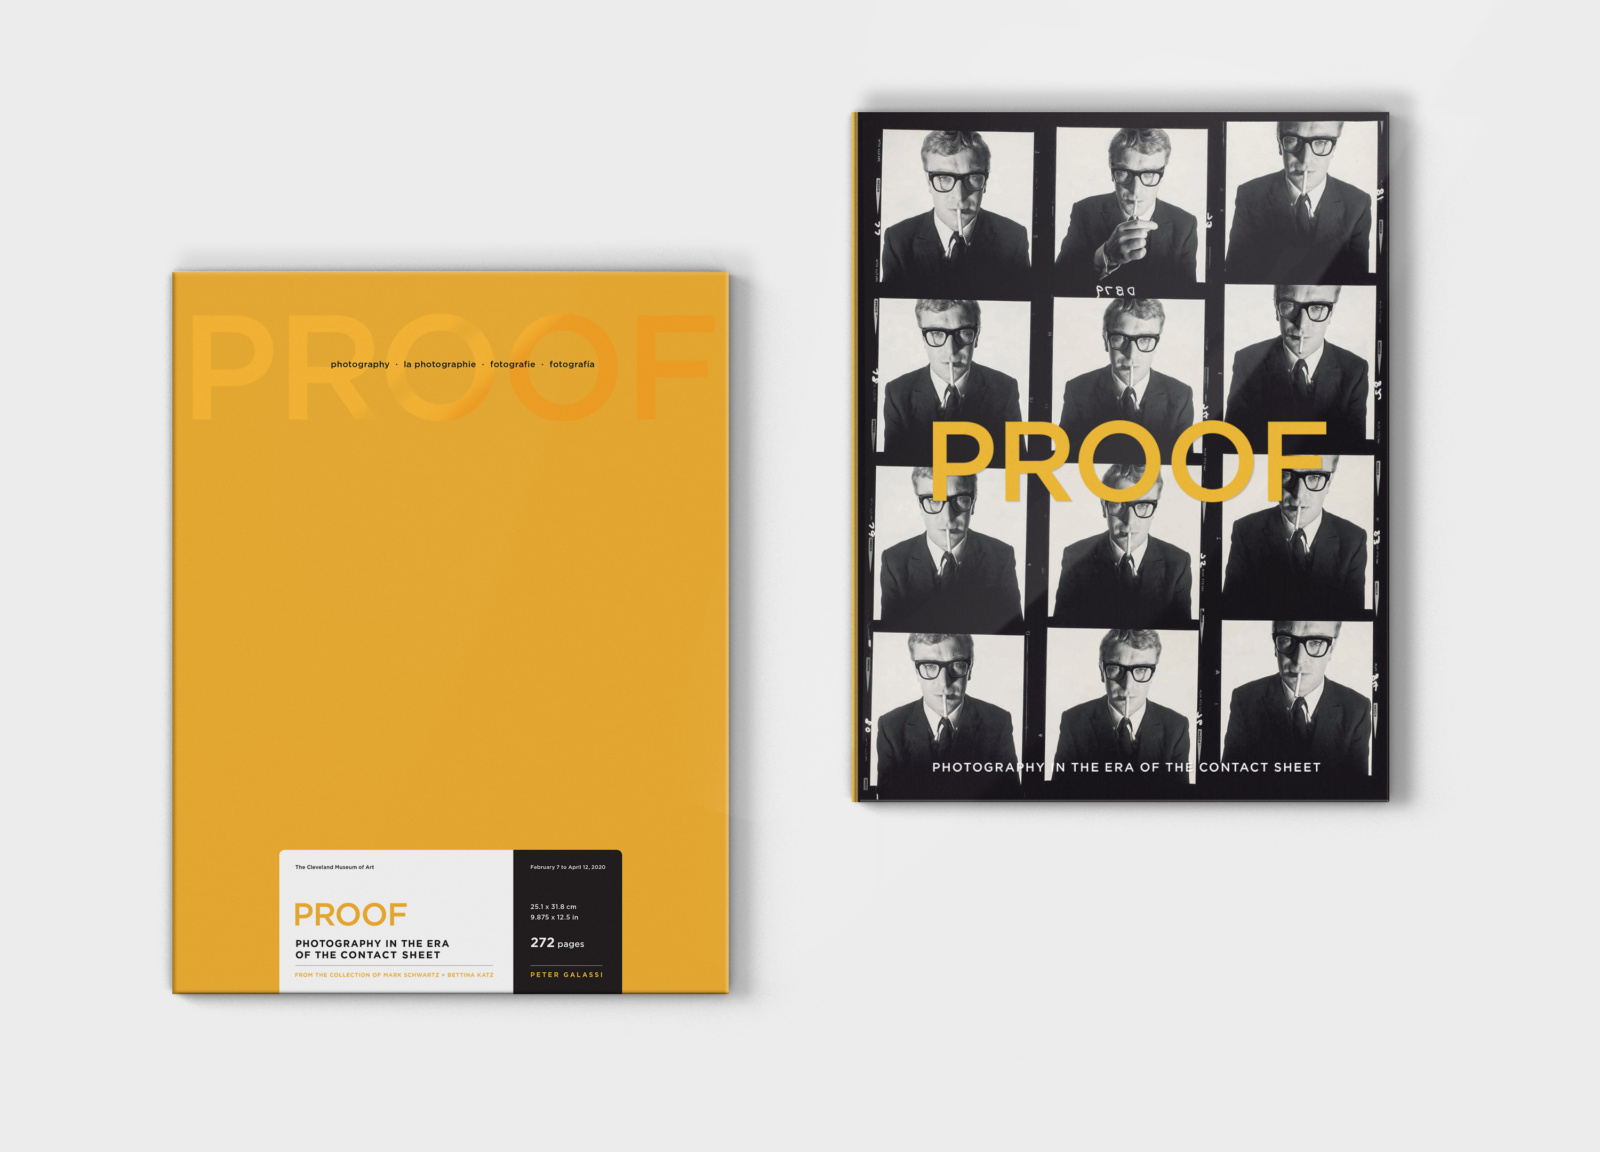 Brand design limited edition box set for PROOF, next to the book design with acetate cover